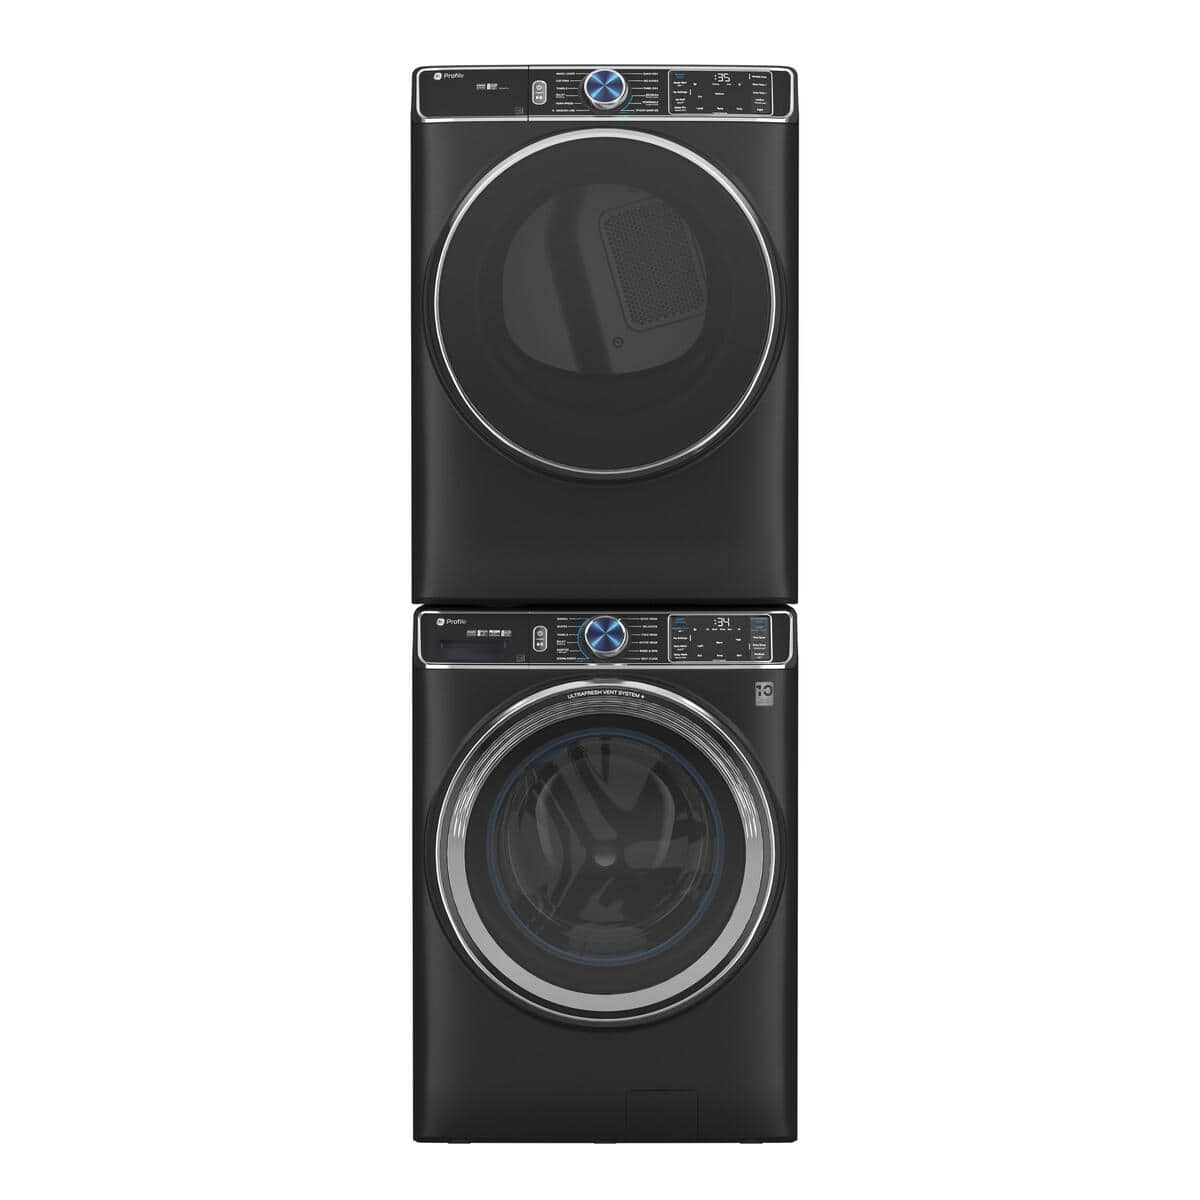 GE washer dryer stackable troubleshooting